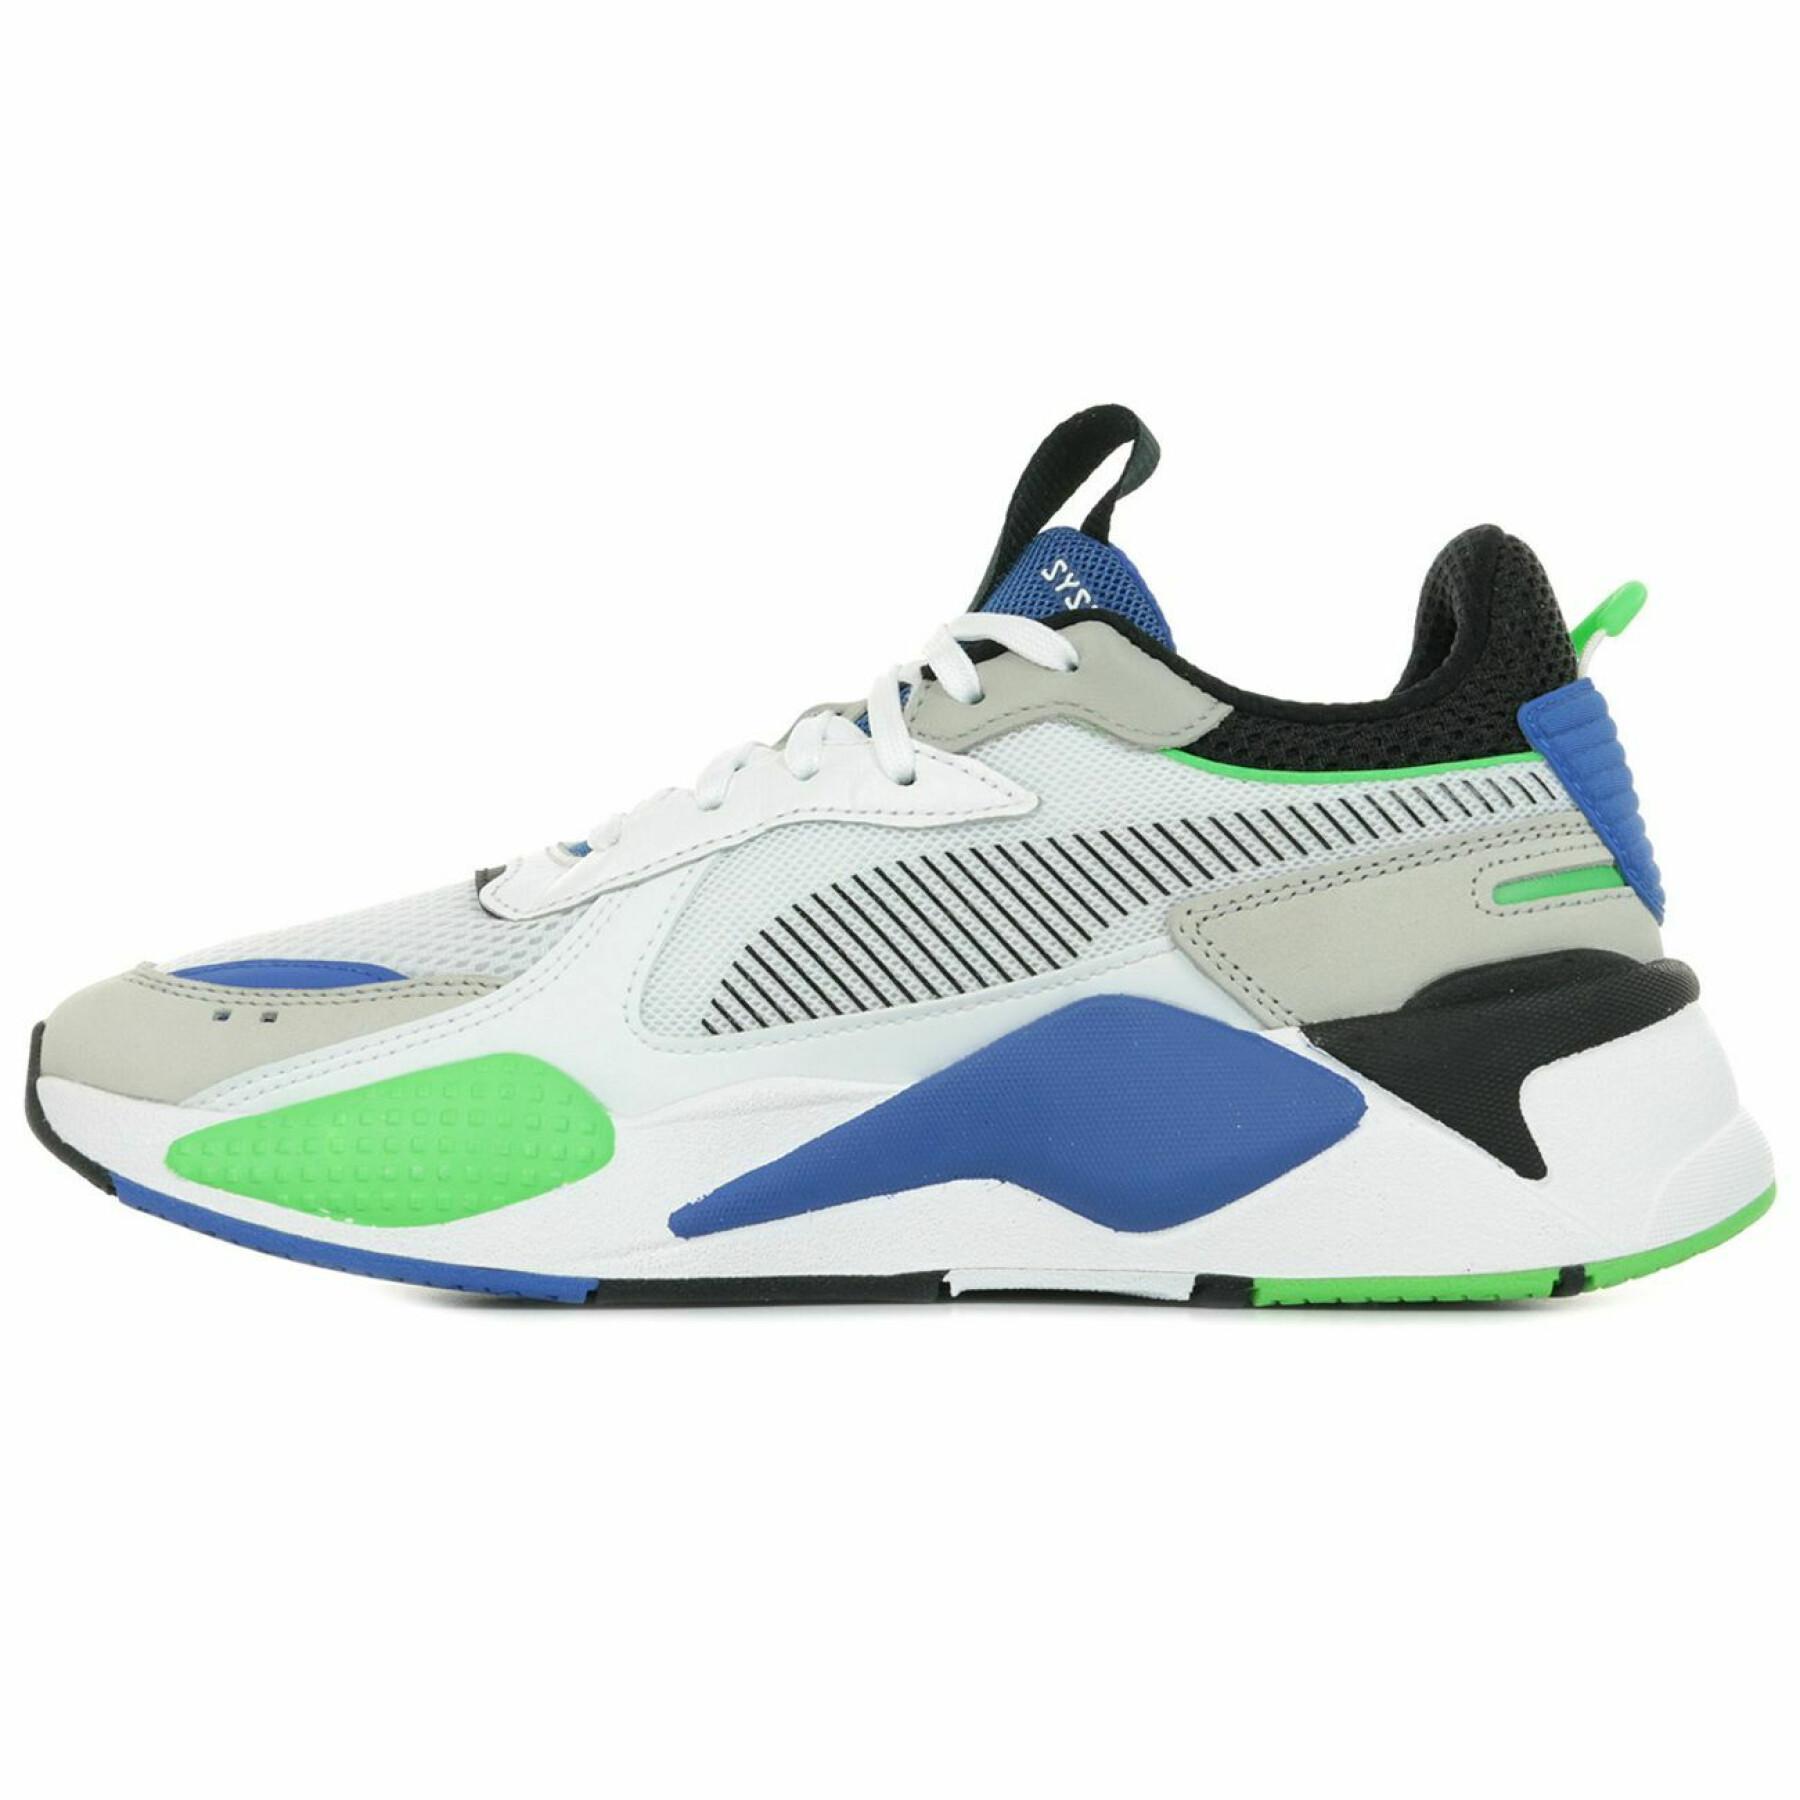 Sneakers Puma RS-X TOYS